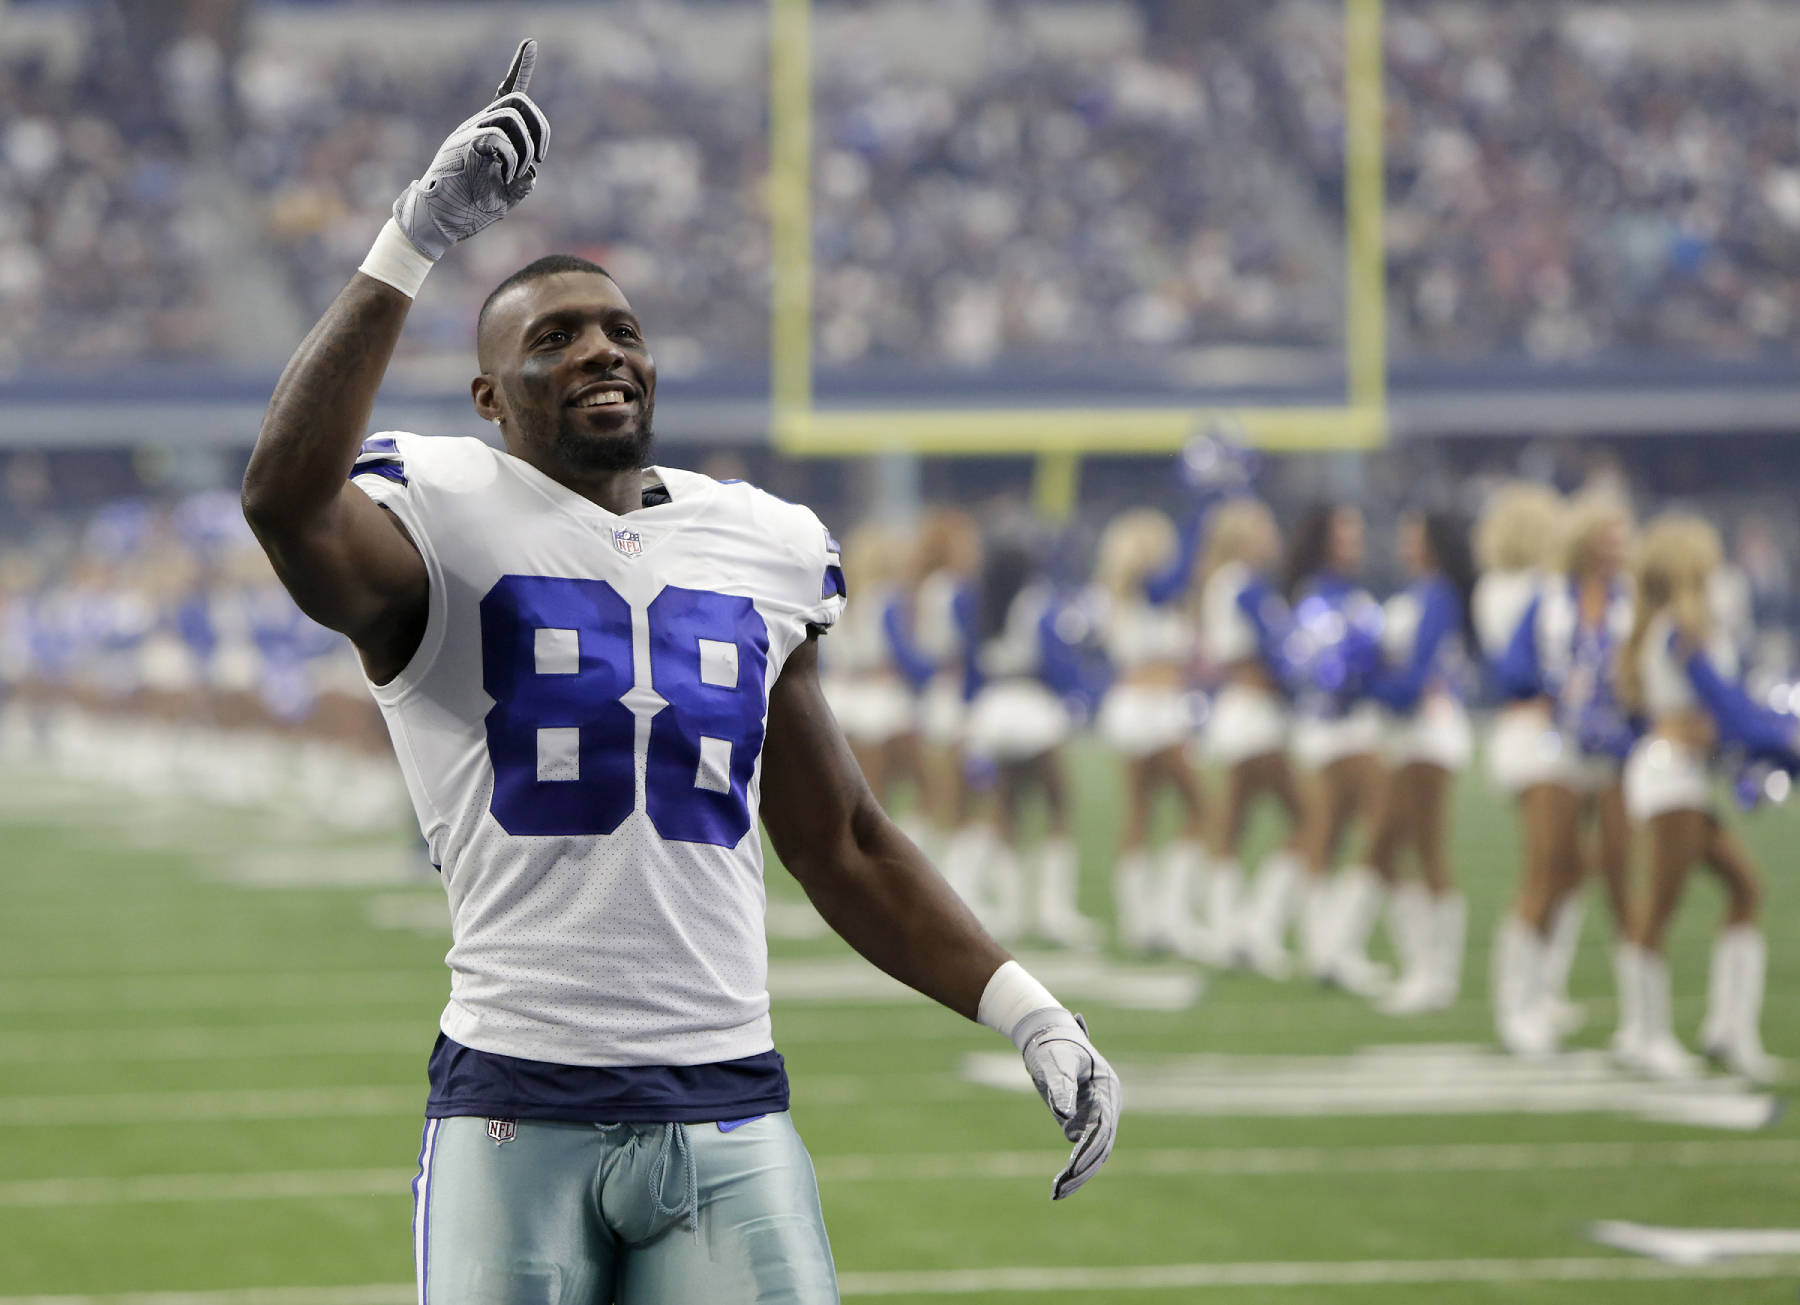 Dez Bryant had a pretty successful career with Jerry Jones' Dallas Cowboys. Bryant recently revealed how close he is to Jones.